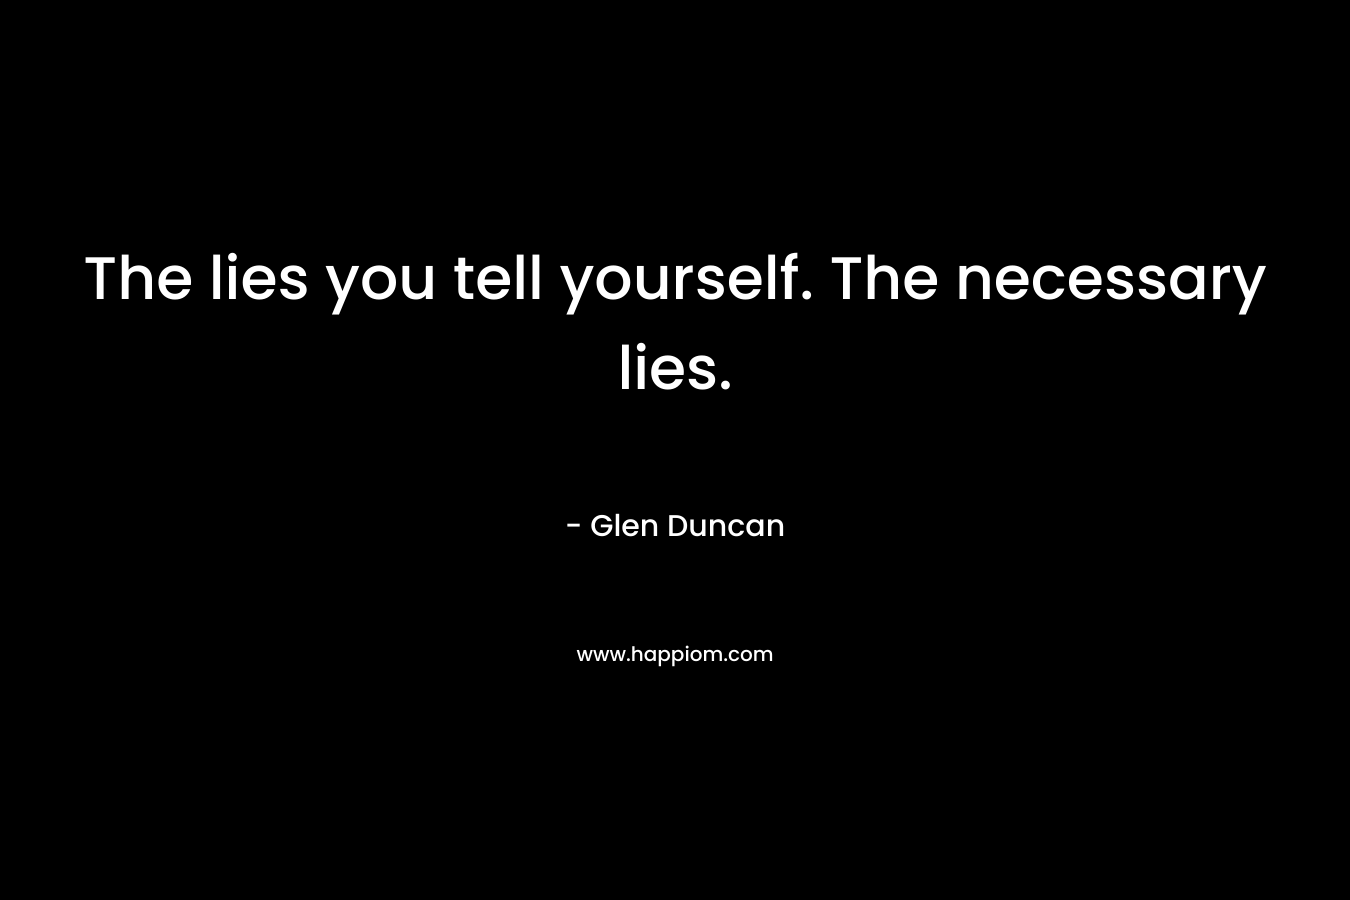 The lies you tell yourself. The necessary lies. – Glen Duncan